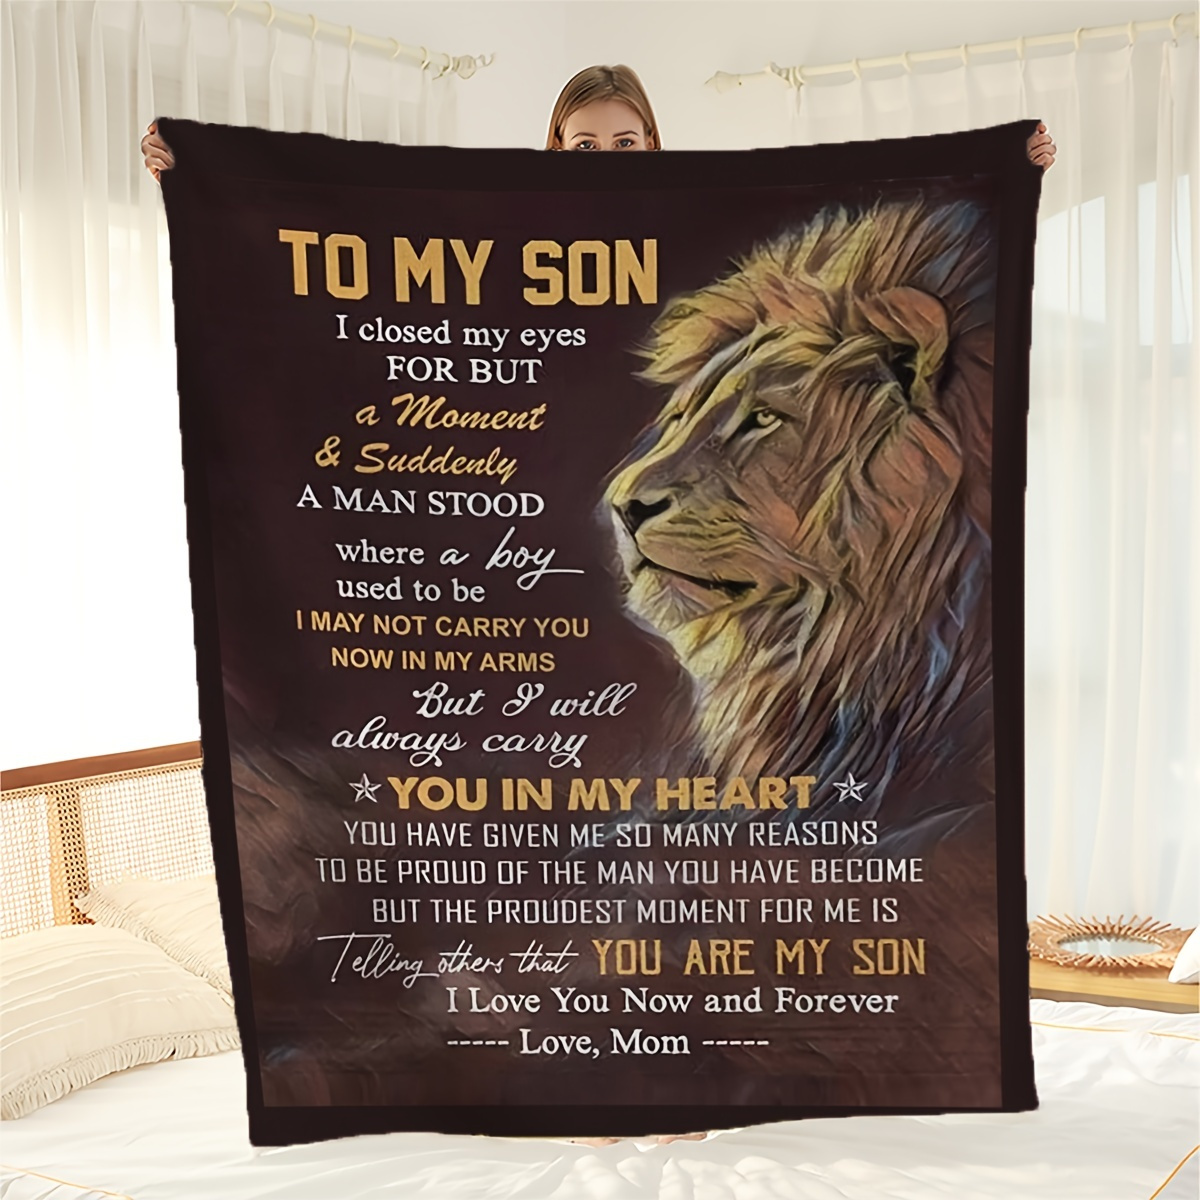 

1pc Lion Flannel Blanket, To My Son From Mom Blanket, Warm Cozy Soft Throw Blanket For Couch Bed Sofa